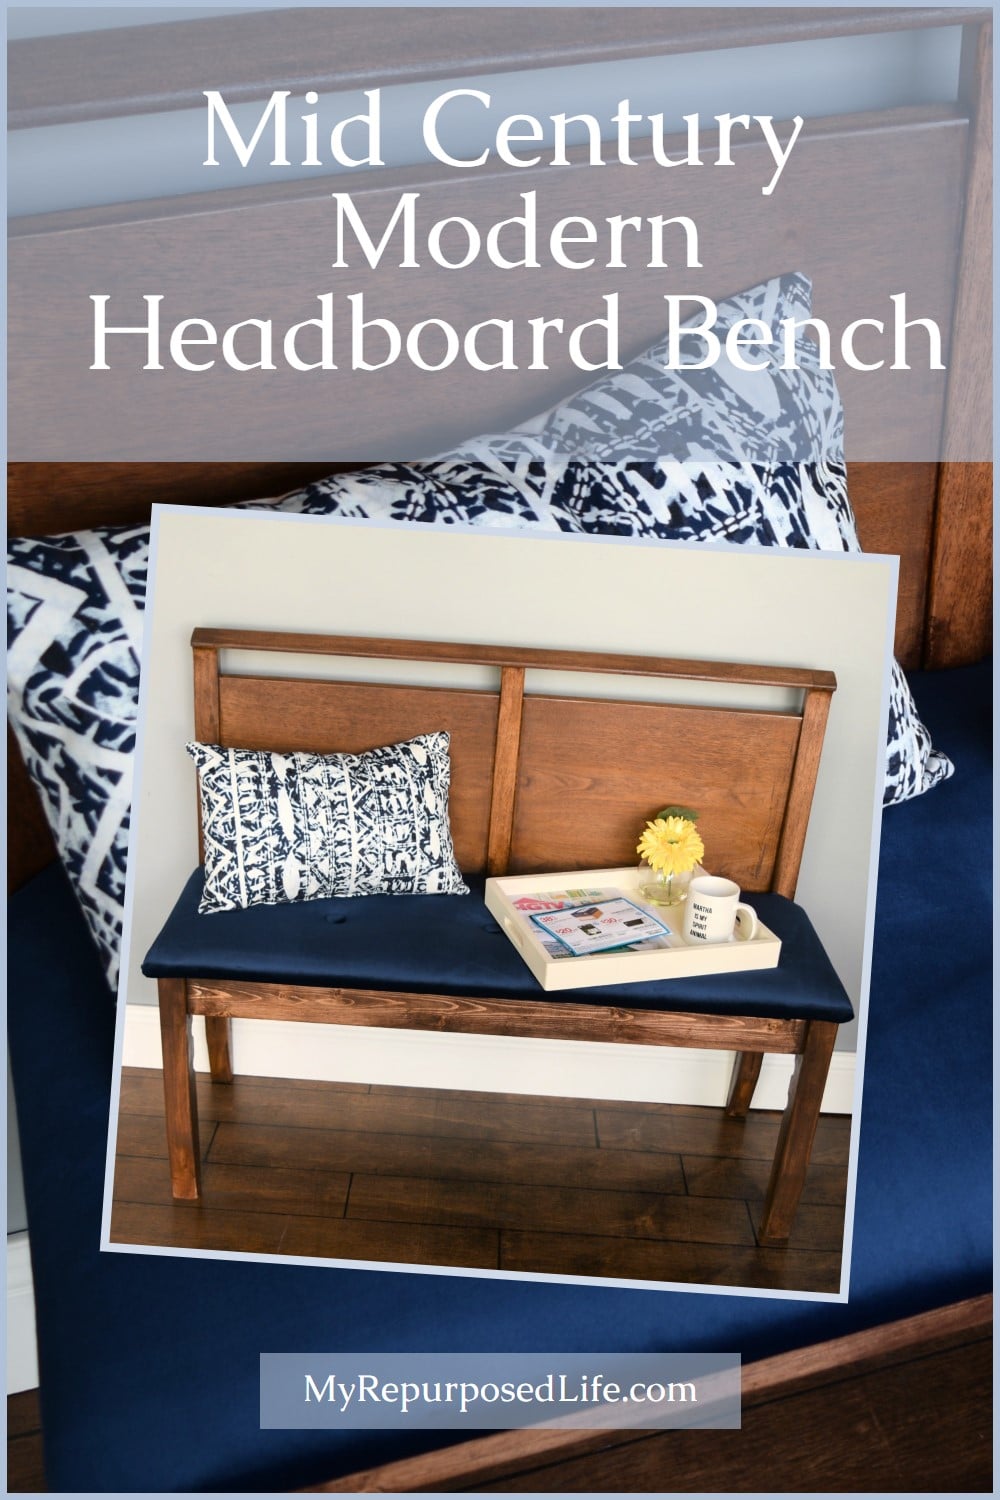 How to make a unique headboard bench from a mid century modern style bed. Step by step directions to do it yourself. Tips on upholstery. #MyRepurposedLife #headboard #bench via @repurposedlife